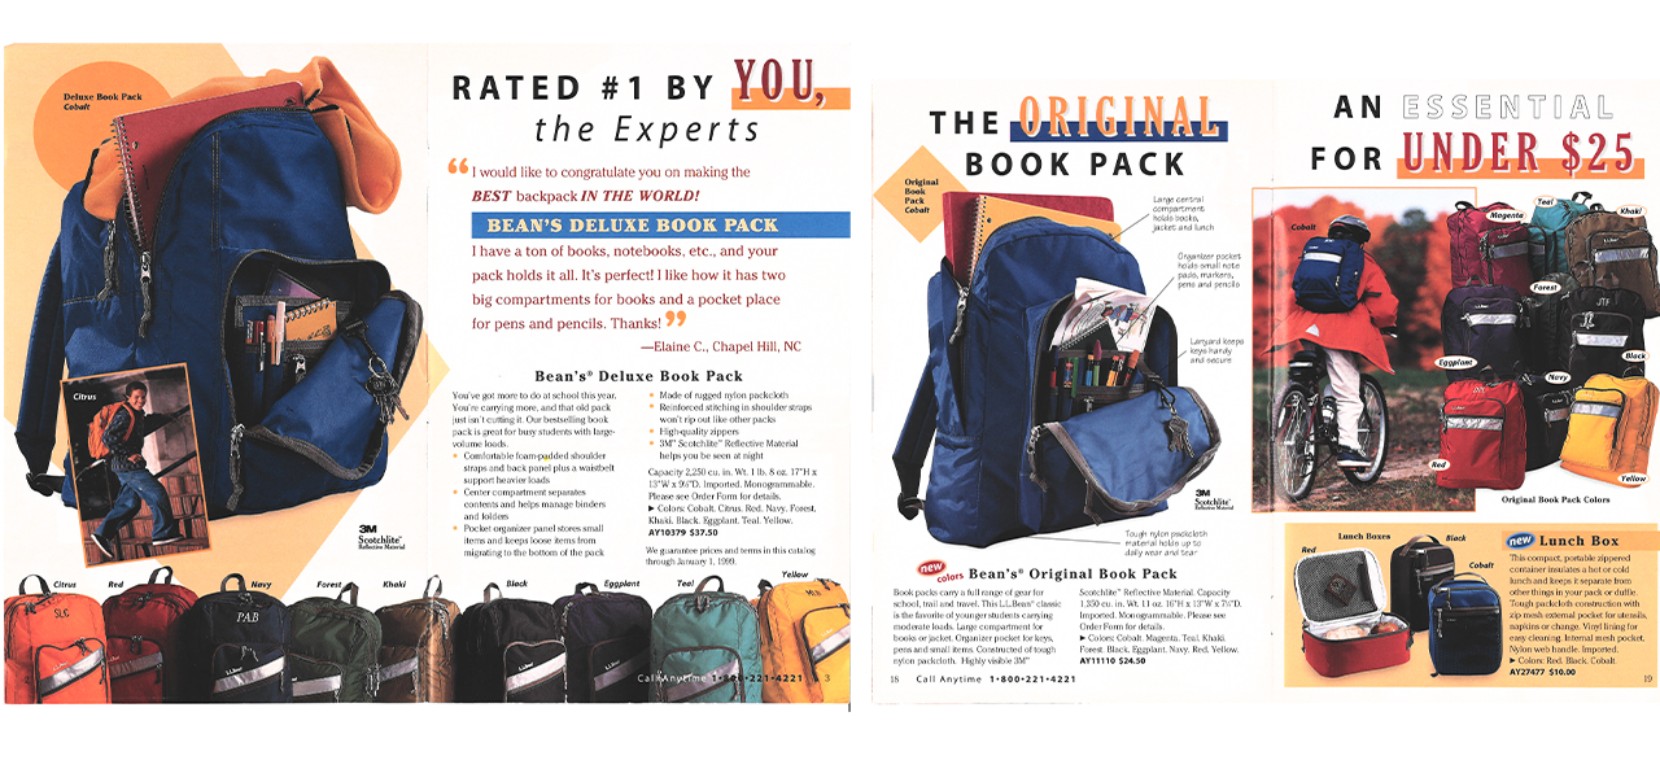 The first installment of L.L.Bean's Book Pack Catalog in 1998